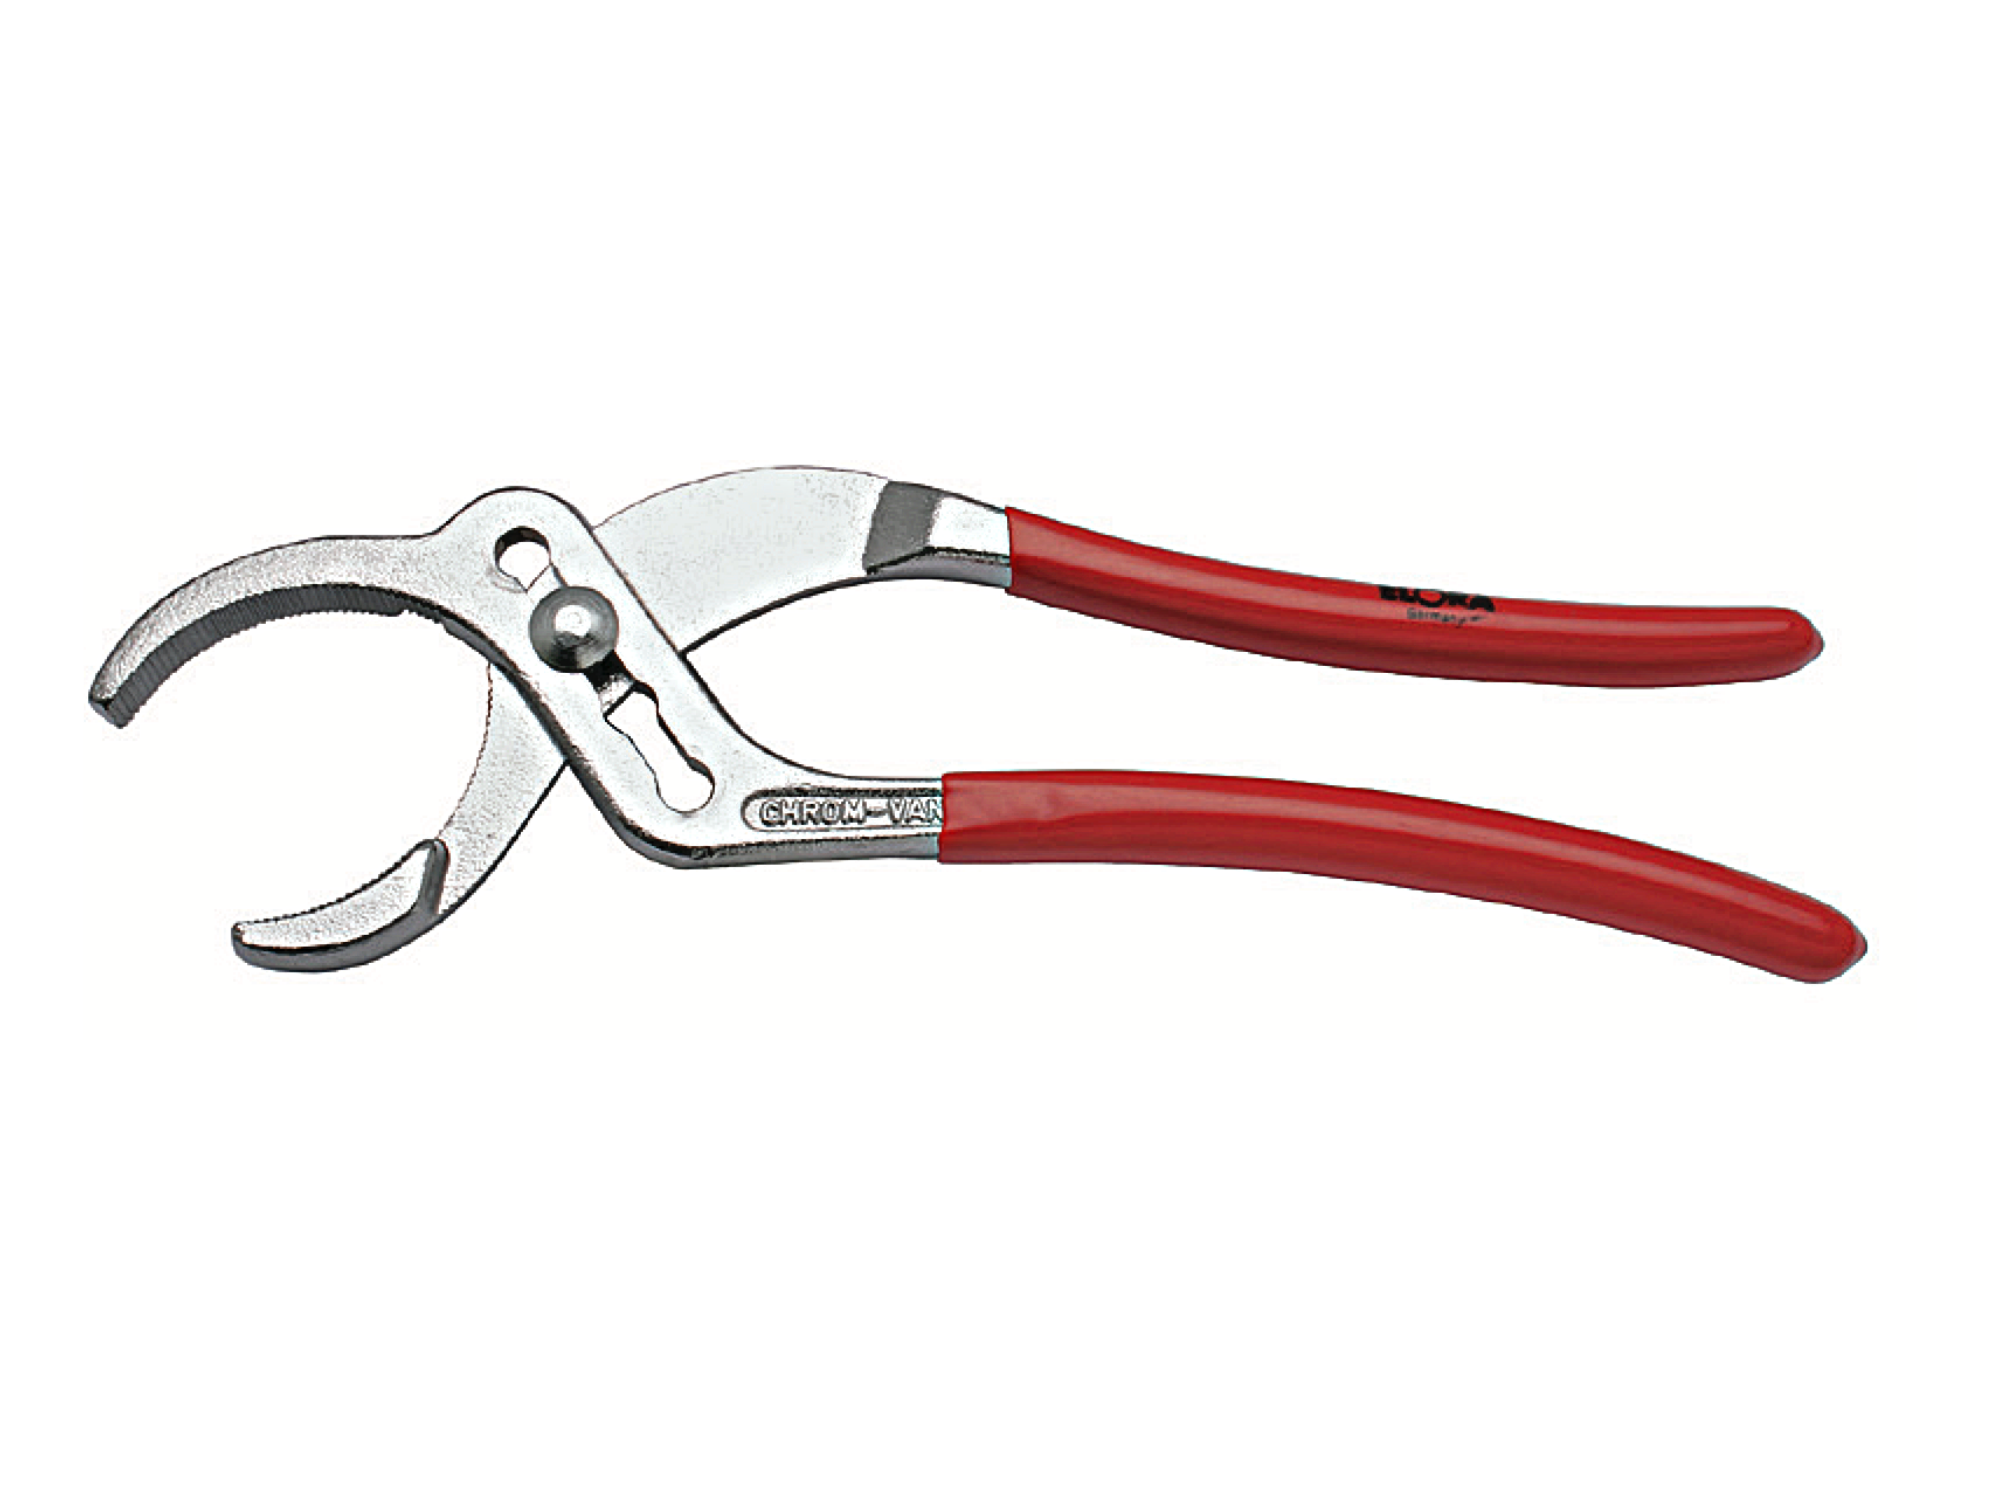 ELORA 138 Siphon or Connector Plier Spare Jaw (ELORA Tools) - Premium Connector Plier from ELORA - Shop now at Yew Aik.